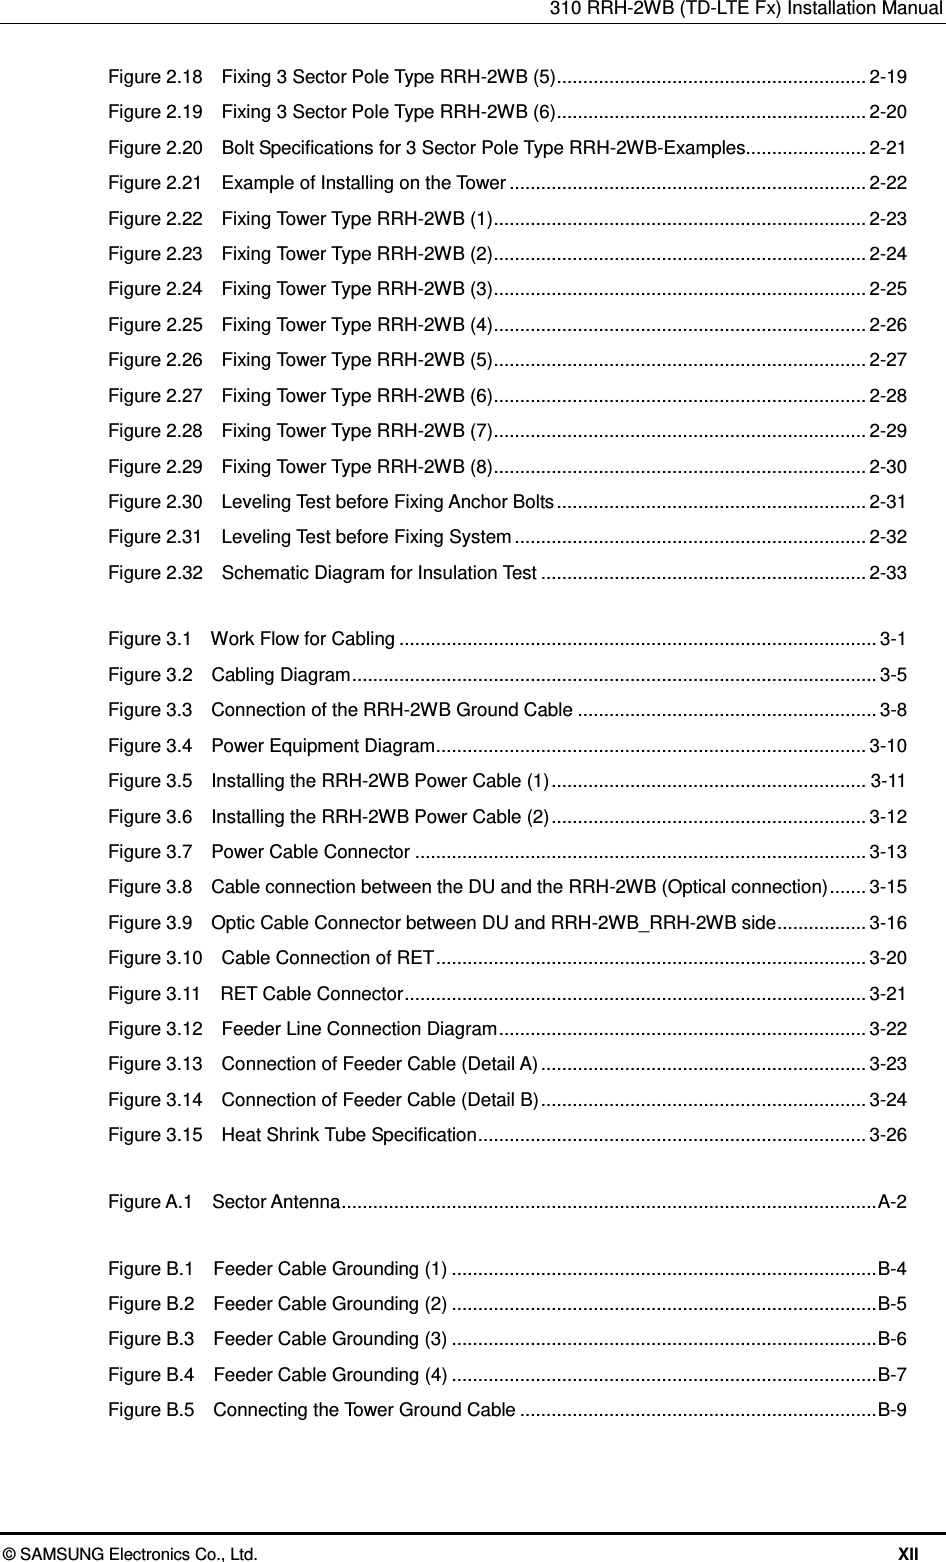 310 RRH-2WB (TD-LTE Fx) Installation Manual  © SAMSUNG Electronics Co., Ltd.  XII Figure 2.18    Fixing 3 Sector Pole Type RRH-2WB (5) ........................................................... 2-19 Figure 2.19    Fixing 3 Sector Pole Type RRH-2WB (6) ........................................................... 2-20 Figure 2.20  Bolt Specifications for 3 Sector Pole Type RRH-2WB-Examples....................... 2-21 Figure 2.21    Example of Installing on the Tower .................................................................... 2-22 Figure 2.22    Fixing Tower Type RRH-2WB (1) ....................................................................... 2-23 Figure 2.23    Fixing Tower Type RRH-2WB (2) ....................................................................... 2-24 Figure 2.24    Fixing Tower Type RRH-2WB (3) ....................................................................... 2-25 Figure 2.25    Fixing Tower Type RRH-2WB (4) ....................................................................... 2-26 Figure 2.26    Fixing Tower Type RRH-2WB (5) ....................................................................... 2-27 Figure 2.27    Fixing Tower Type RRH-2WB (6) ....................................................................... 2-28 Figure 2.28    Fixing Tower Type RRH-2WB (7) ....................................................................... 2-29 Figure 2.29    Fixing Tower Type RRH-2WB (8) ....................................................................... 2-30 Figure 2.30    Leveling Test before Fixing Anchor Bolts ........................................................... 2-31 Figure 2.31    Leveling Test before Fixing System ................................................................... 2-32 Figure 2.32    Schematic Diagram for Insulation Test .............................................................. 2-33  Figure 3.1    Work Flow for Cabling ........................................................................................... 3-1 Figure 3.2    Cabling Diagram .................................................................................................... 3-5 Figure 3.3    Connection of the RRH-2WB Ground Cable ......................................................... 3-8 Figure 3.4    Power Equipment Diagram .................................................................................. 3-10 Figure 3.5    Installing the RRH-2WB Power Cable (1) ............................................................ 3-11 Figure 3.6    Installing the RRH-2WB Power Cable (2) ............................................................ 3-12 Figure 3.7    Power Cable Connector ...................................................................................... 3-13 Figure 3.8    Cable connection between the DU and the RRH-2WB (Optical connection) ....... 3-15 Figure 3.9    Optic Cable Connector between DU and RRH-2WB_RRH-2WB side ................. 3-16 Figure 3.10    Cable Connection of RET .................................................................................. 3-20 Figure 3.11    RET Cable Connector ........................................................................................ 3-21 Figure 3.12    Feeder Line Connection Diagram ...................................................................... 3-22 Figure 3.13    Connection of Feeder Cable (Detail A) .............................................................. 3-23 Figure 3.14    Connection of Feeder Cable (Detail B) .............................................................. 3-24 Figure 3.15    Heat Shrink Tube Specification .......................................................................... 3-26  Figure A.1    Sector Antenna ...................................................................................................... A-2  Figure B.1    Feeder Cable Grounding (1) ................................................................................. B-4 Figure B.2    Feeder Cable Grounding (2) ................................................................................. B-5 Figure B.3    Feeder Cable Grounding (3) ................................................................................. B-6 Figure B.4    Feeder Cable Grounding (4) ................................................................................. B-7 Figure B.5    Connecting the Tower Ground Cable .................................................................... B-9  